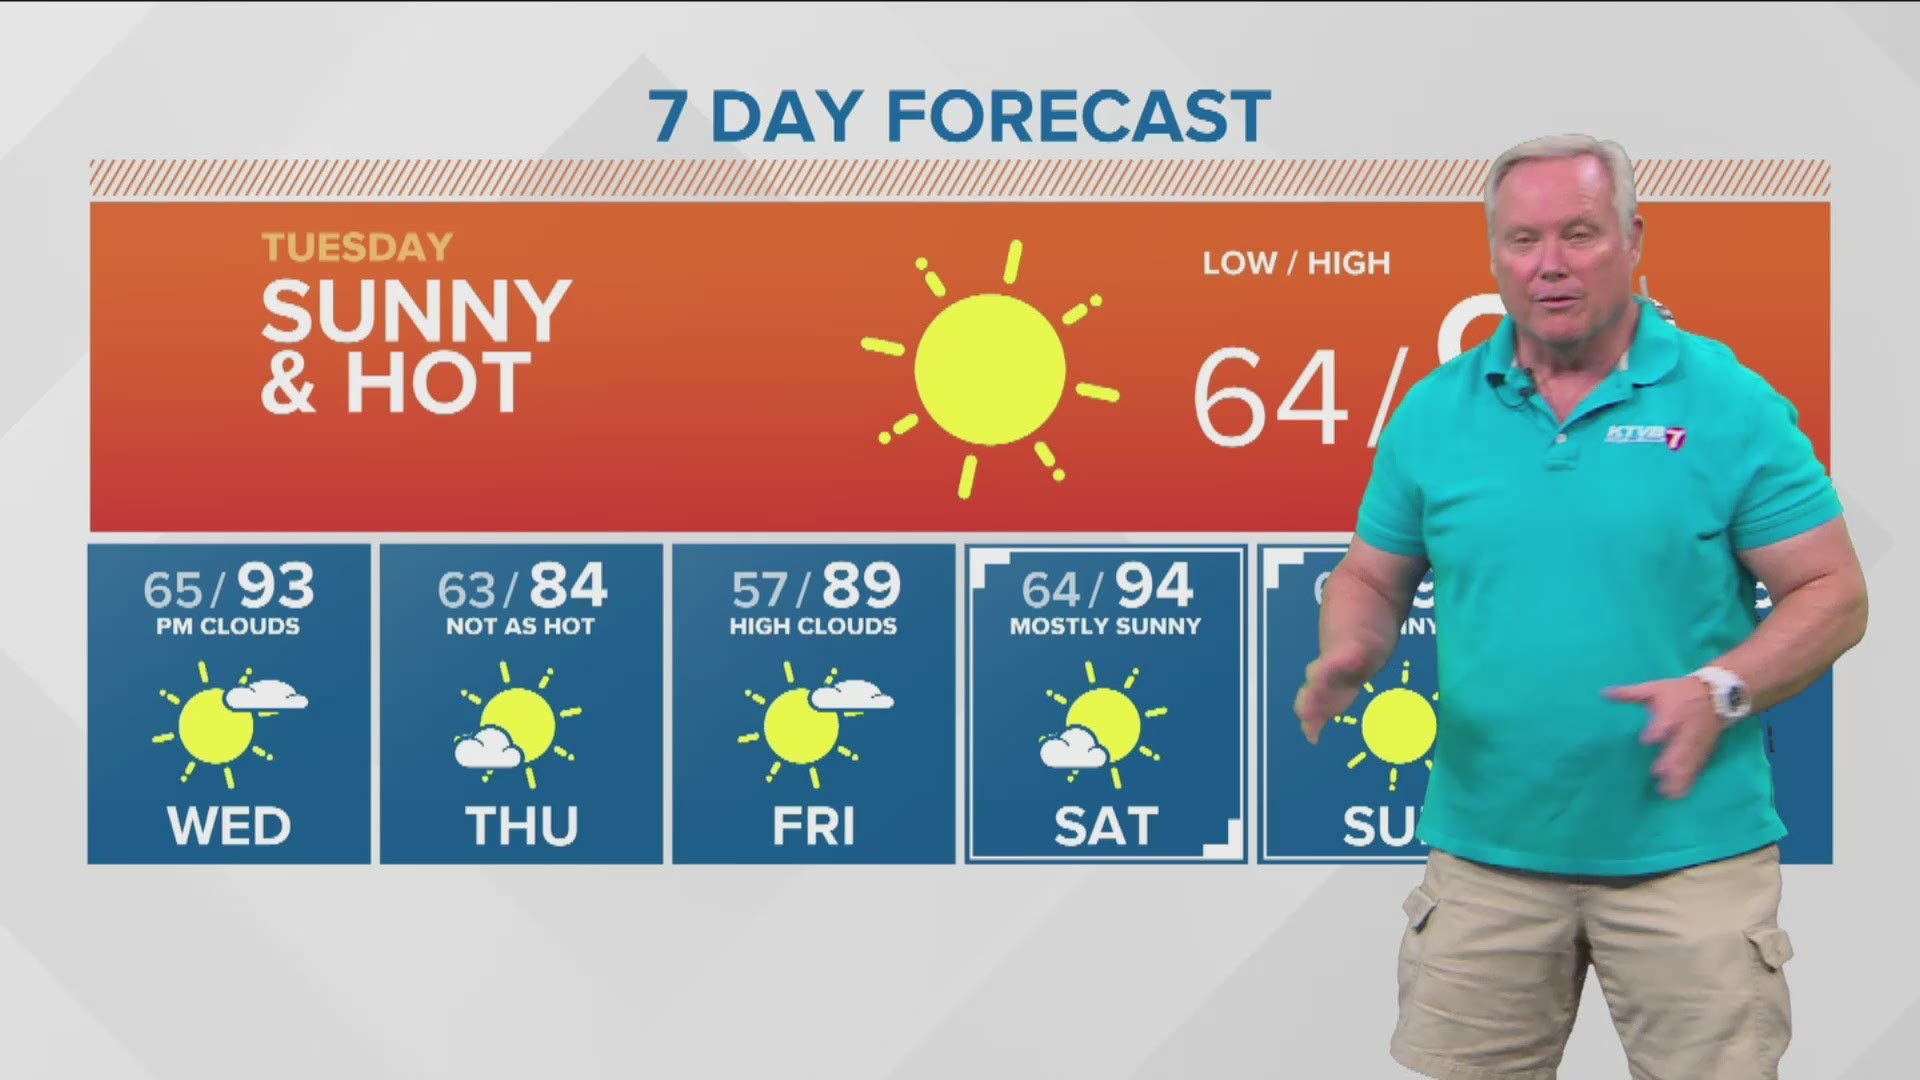 Rick Lantz says Tuesday will be the hottest day of the week.